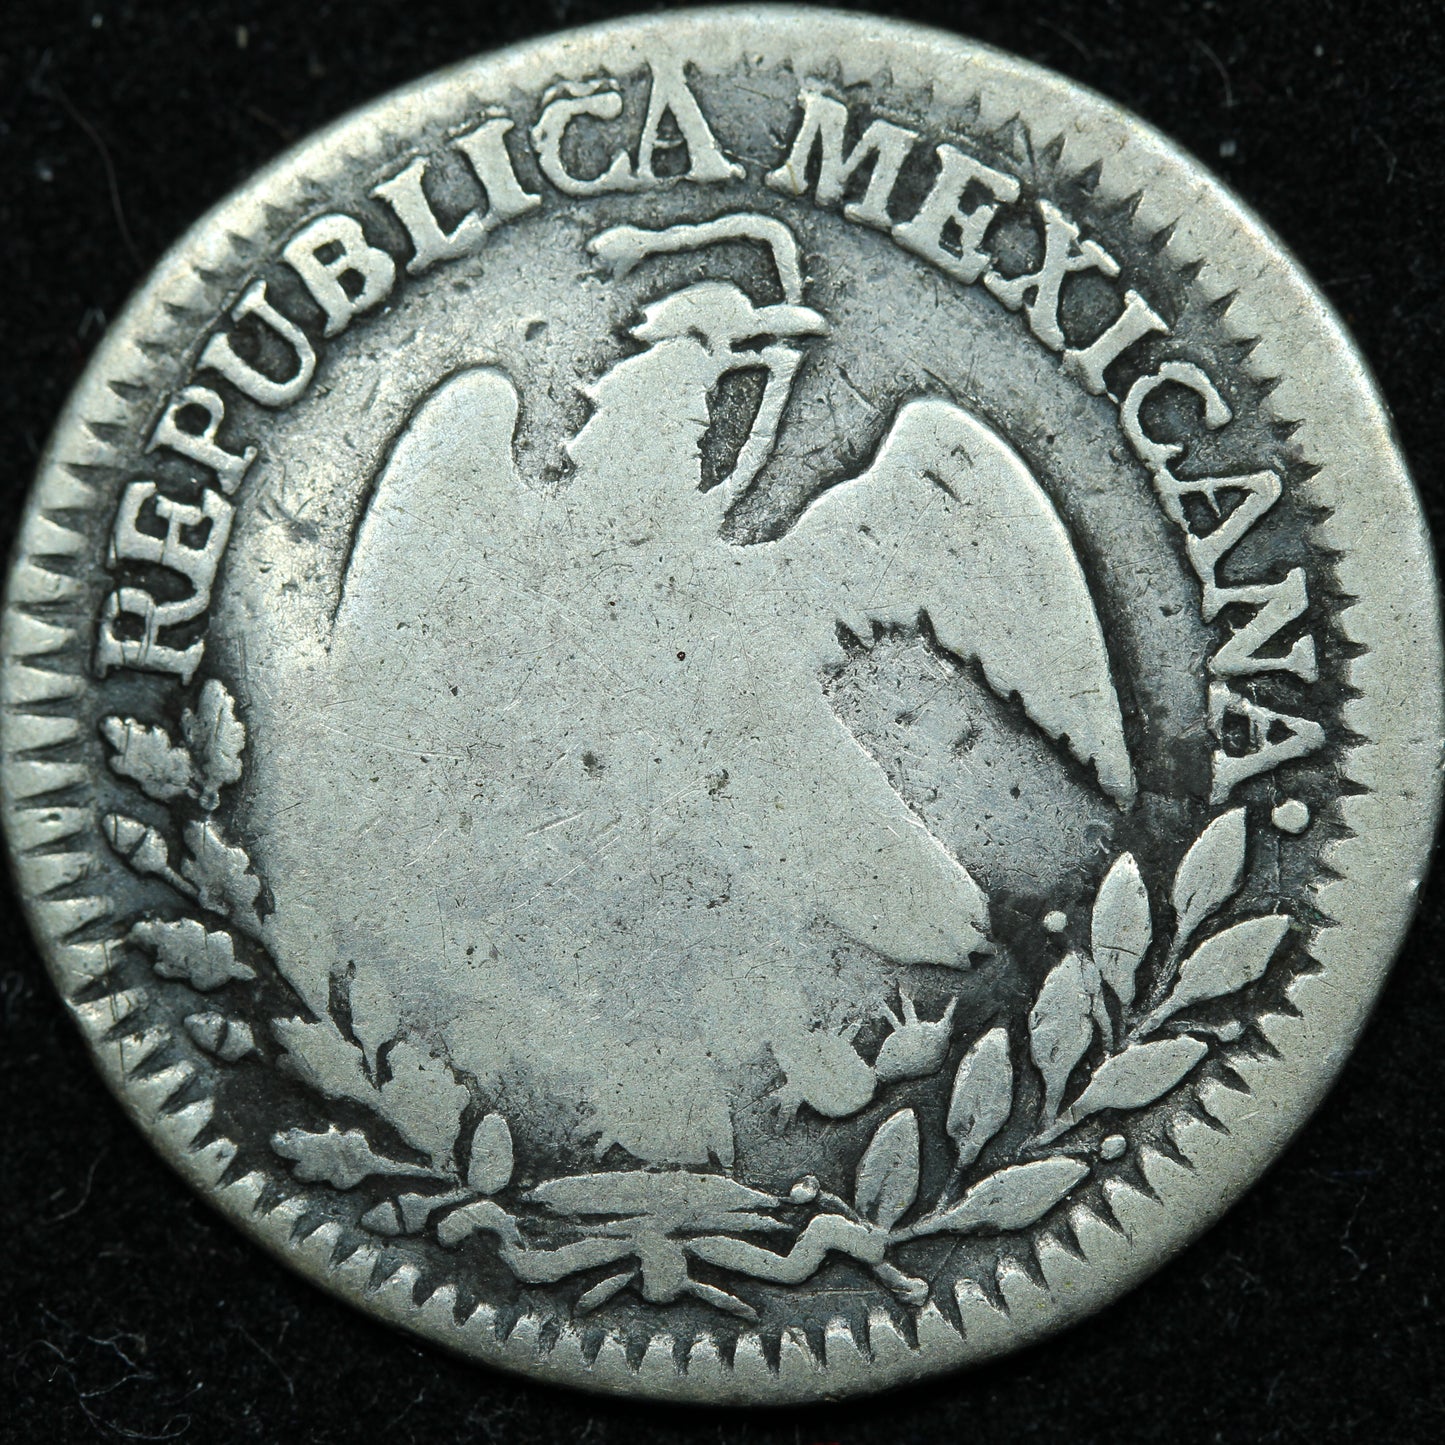 1826 1 Reale Mexico First Republic Silver Coin - KM# 372.6